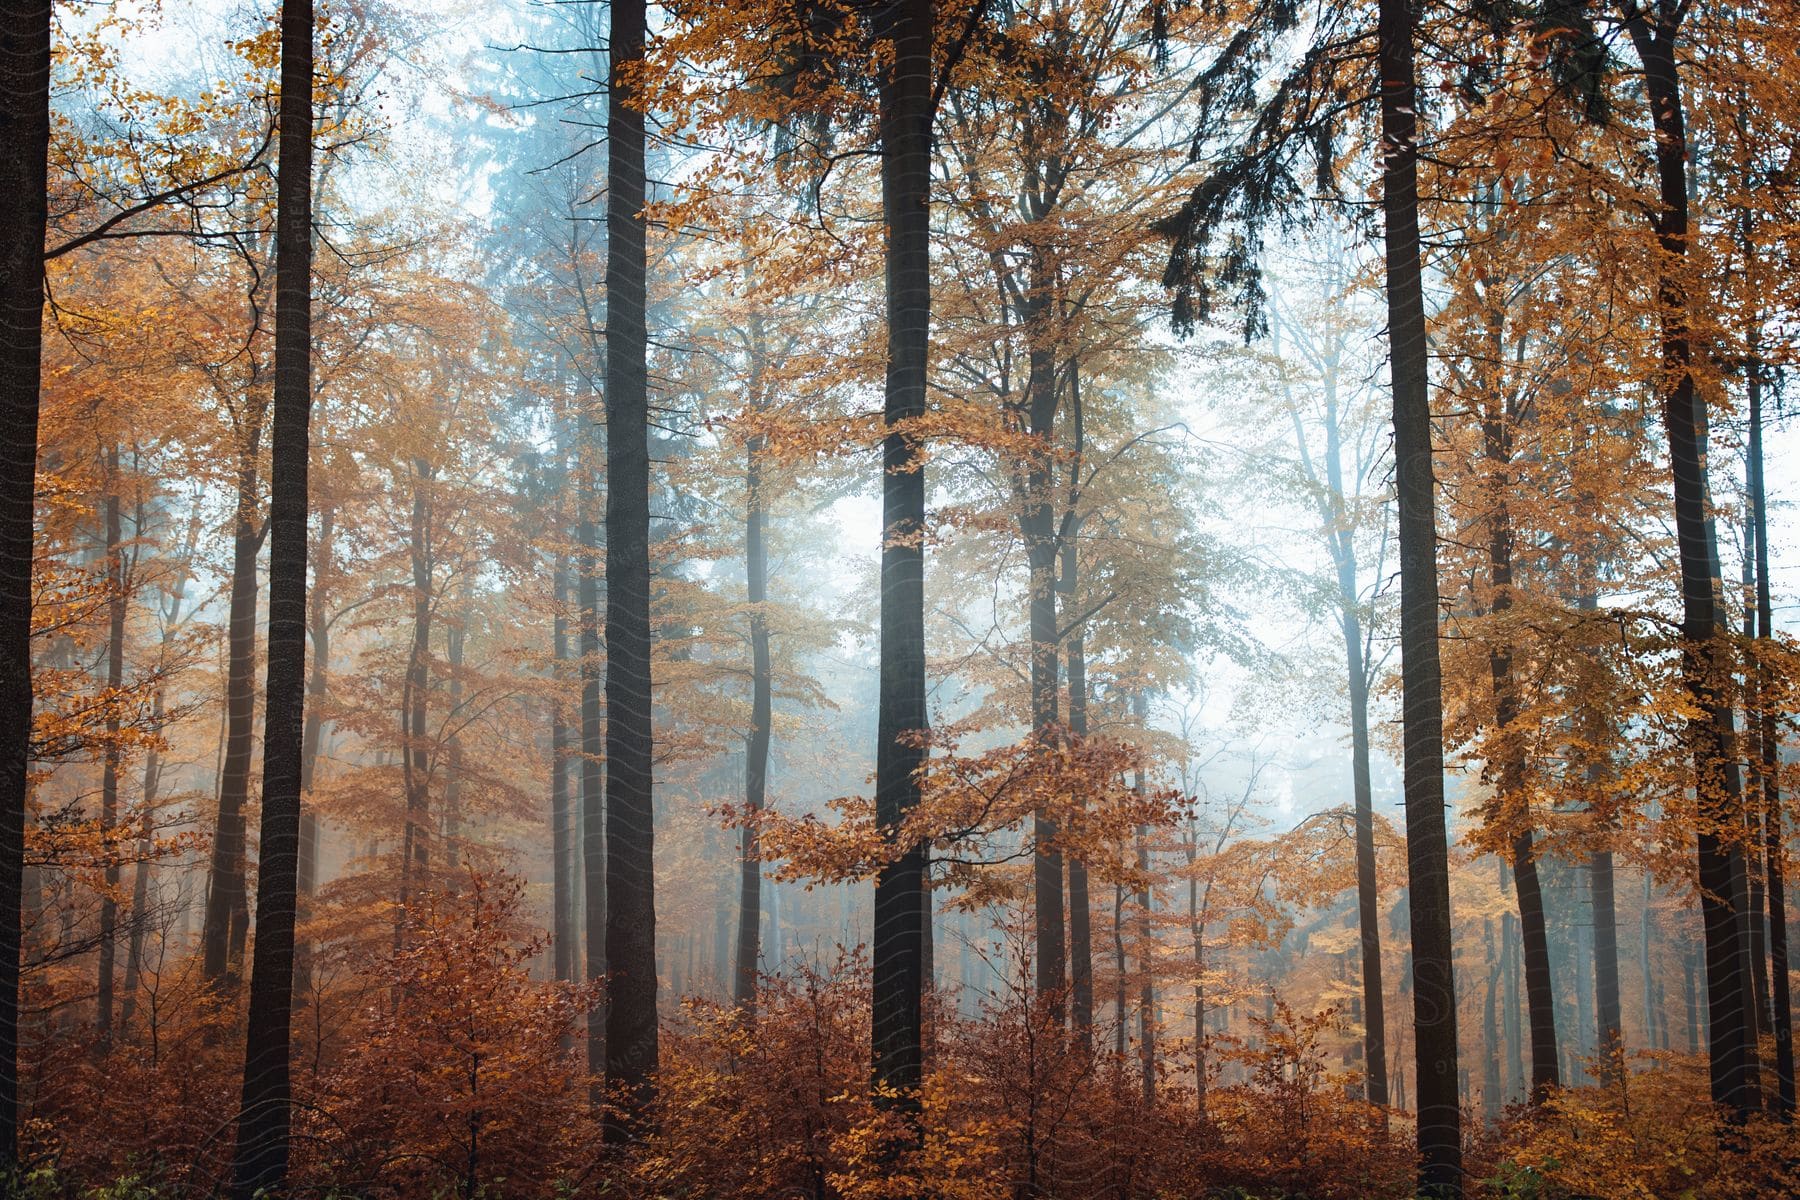 Forest trees with yellow leaves and mist descending in germanys enchanted forests